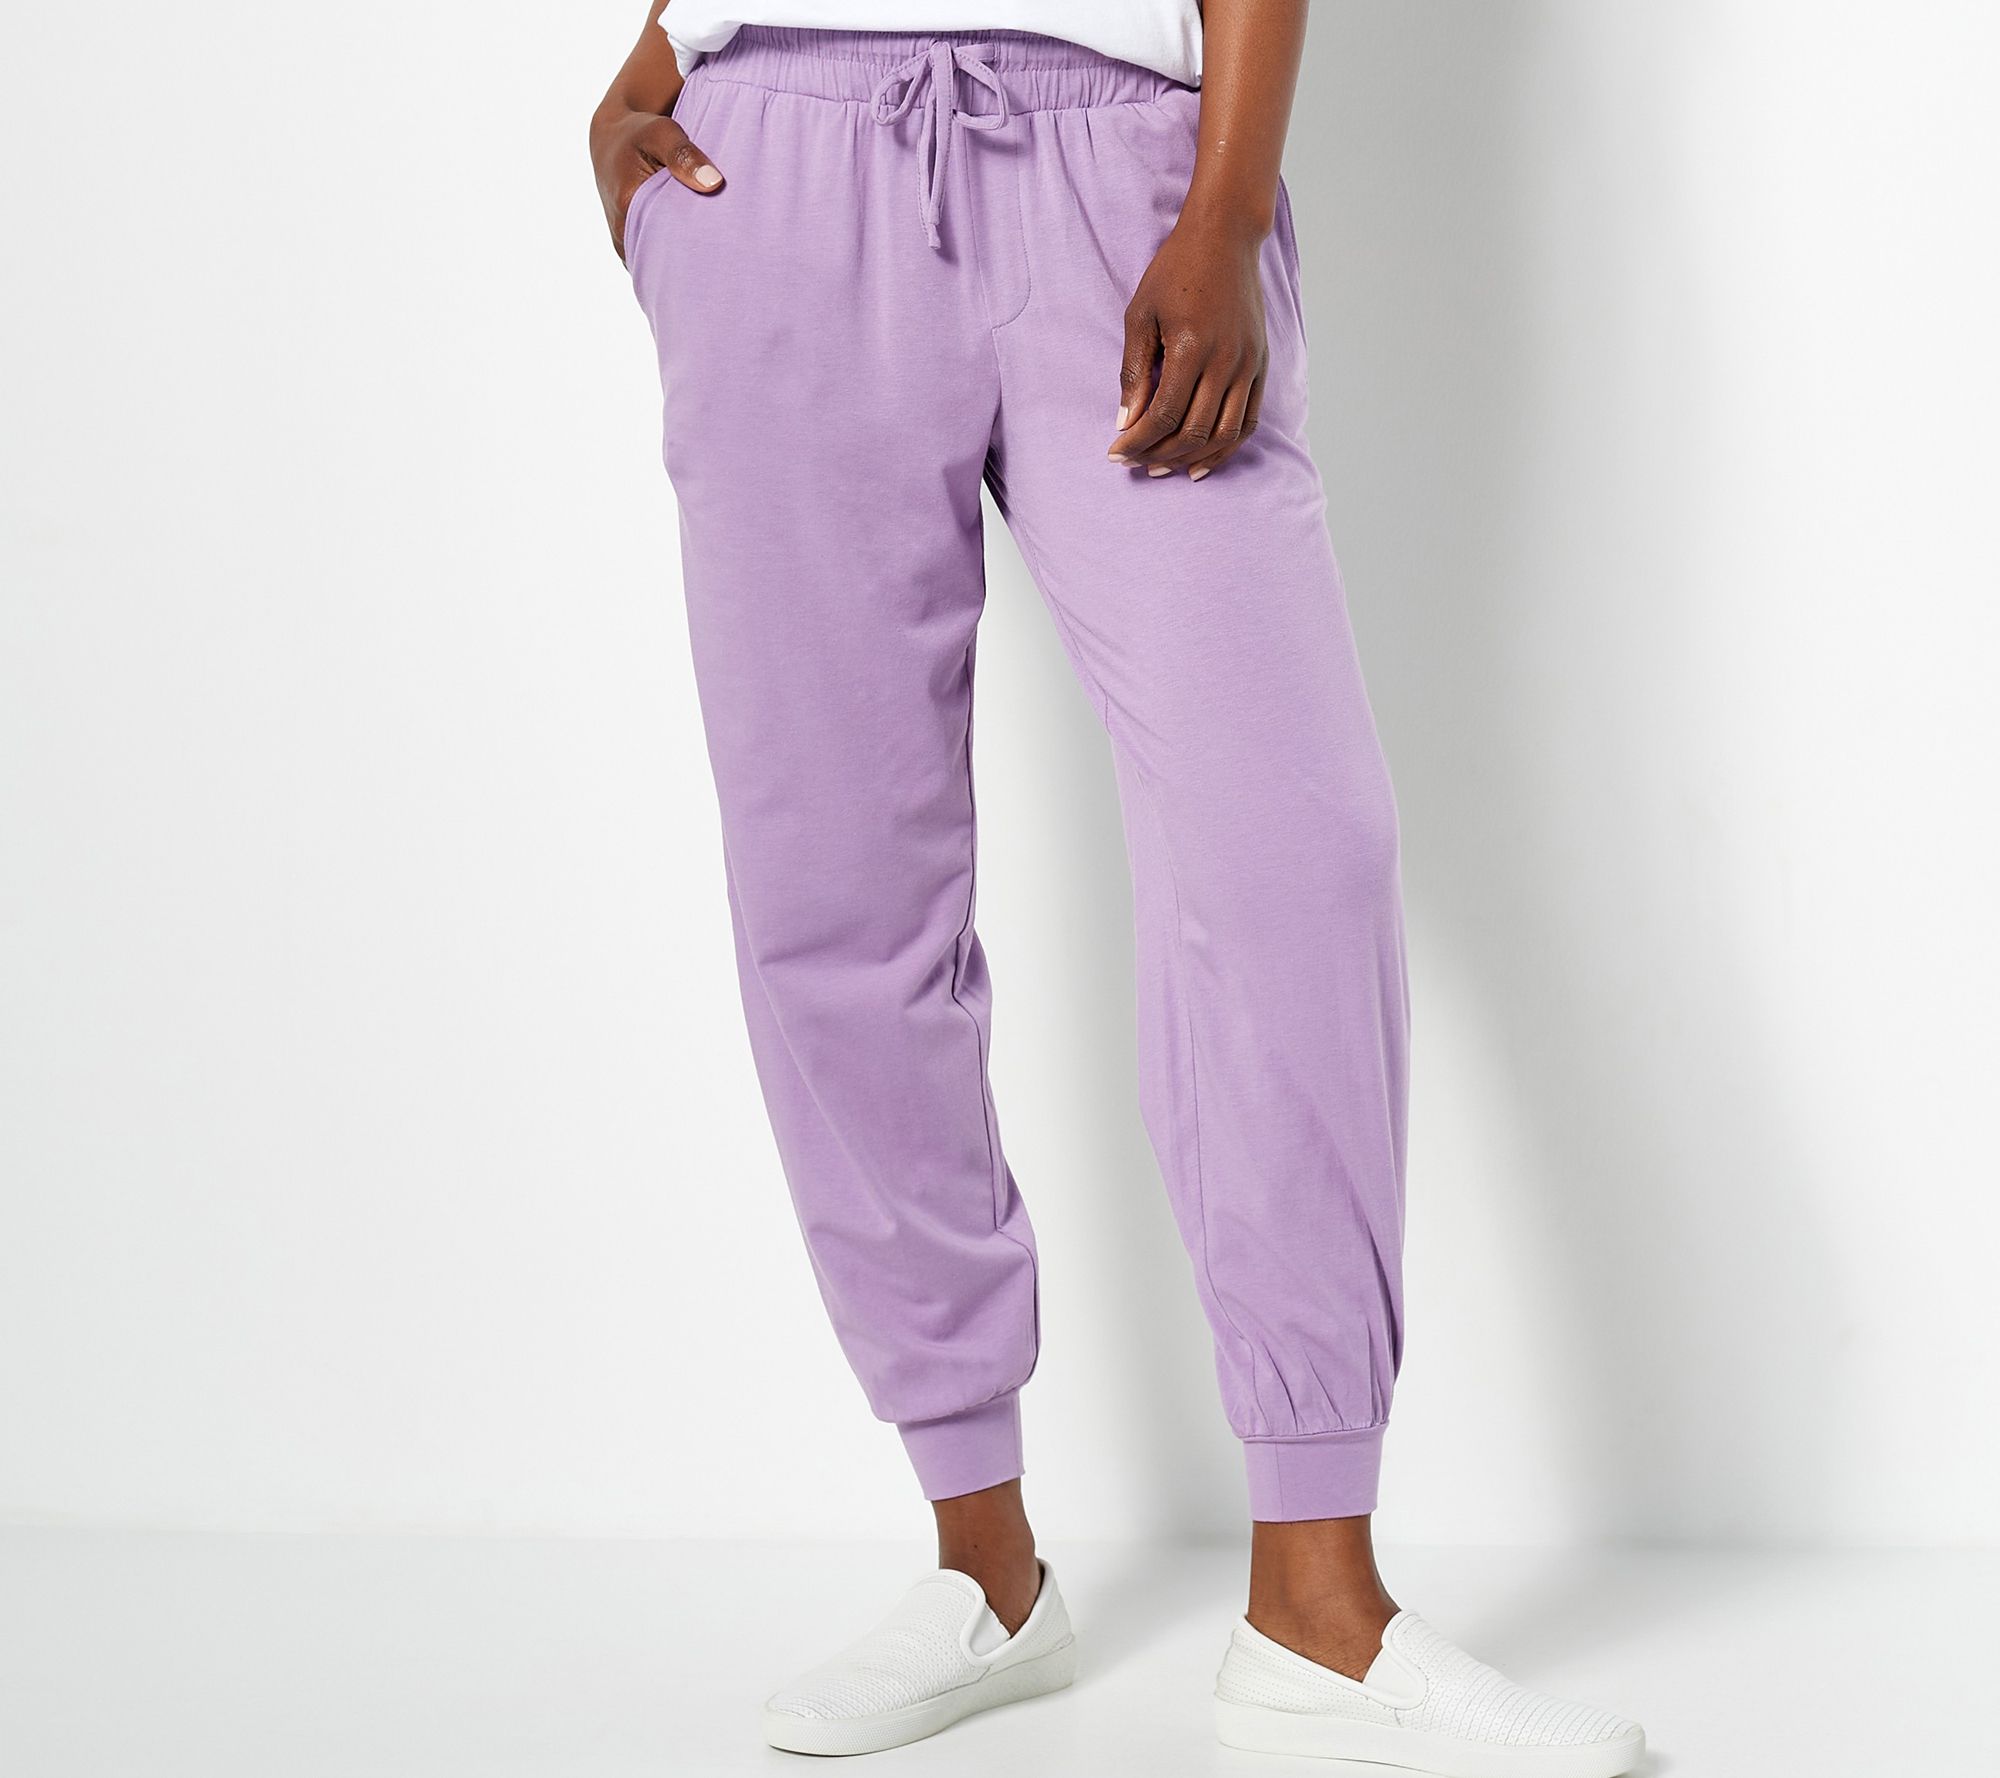 Cozy Touch Women's Regular Fit Cotton Blend Track Pant M to 4XL Sizes Combo  Pack Black/Lavender